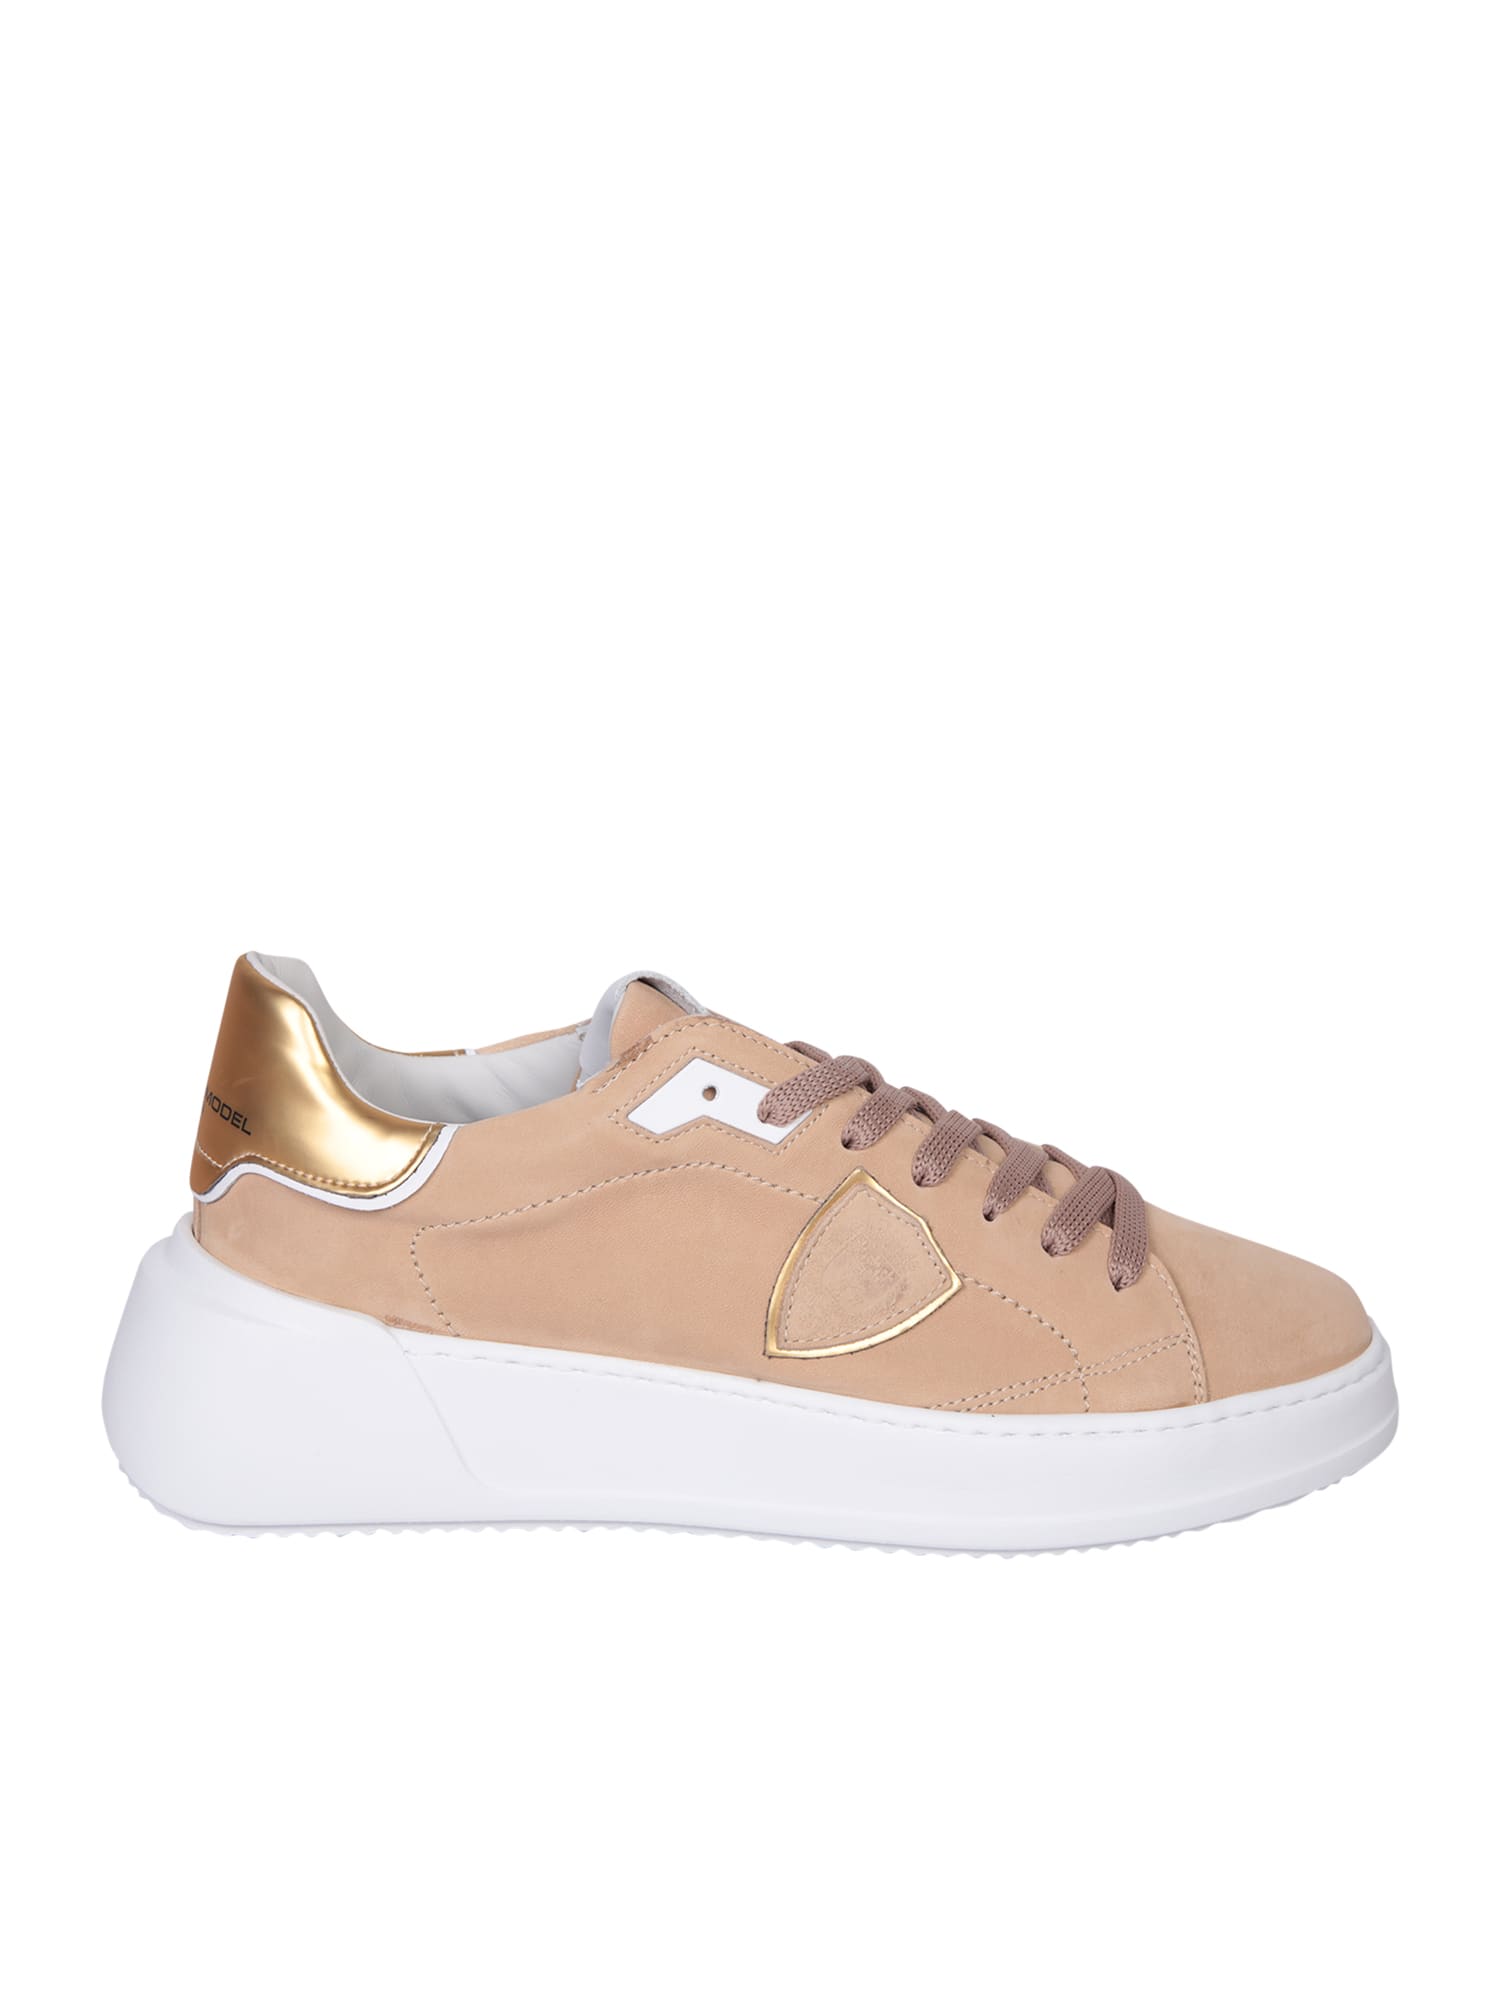 PHILIPPE MODEL TRES TEMPLE BEIGE SNEAKERS